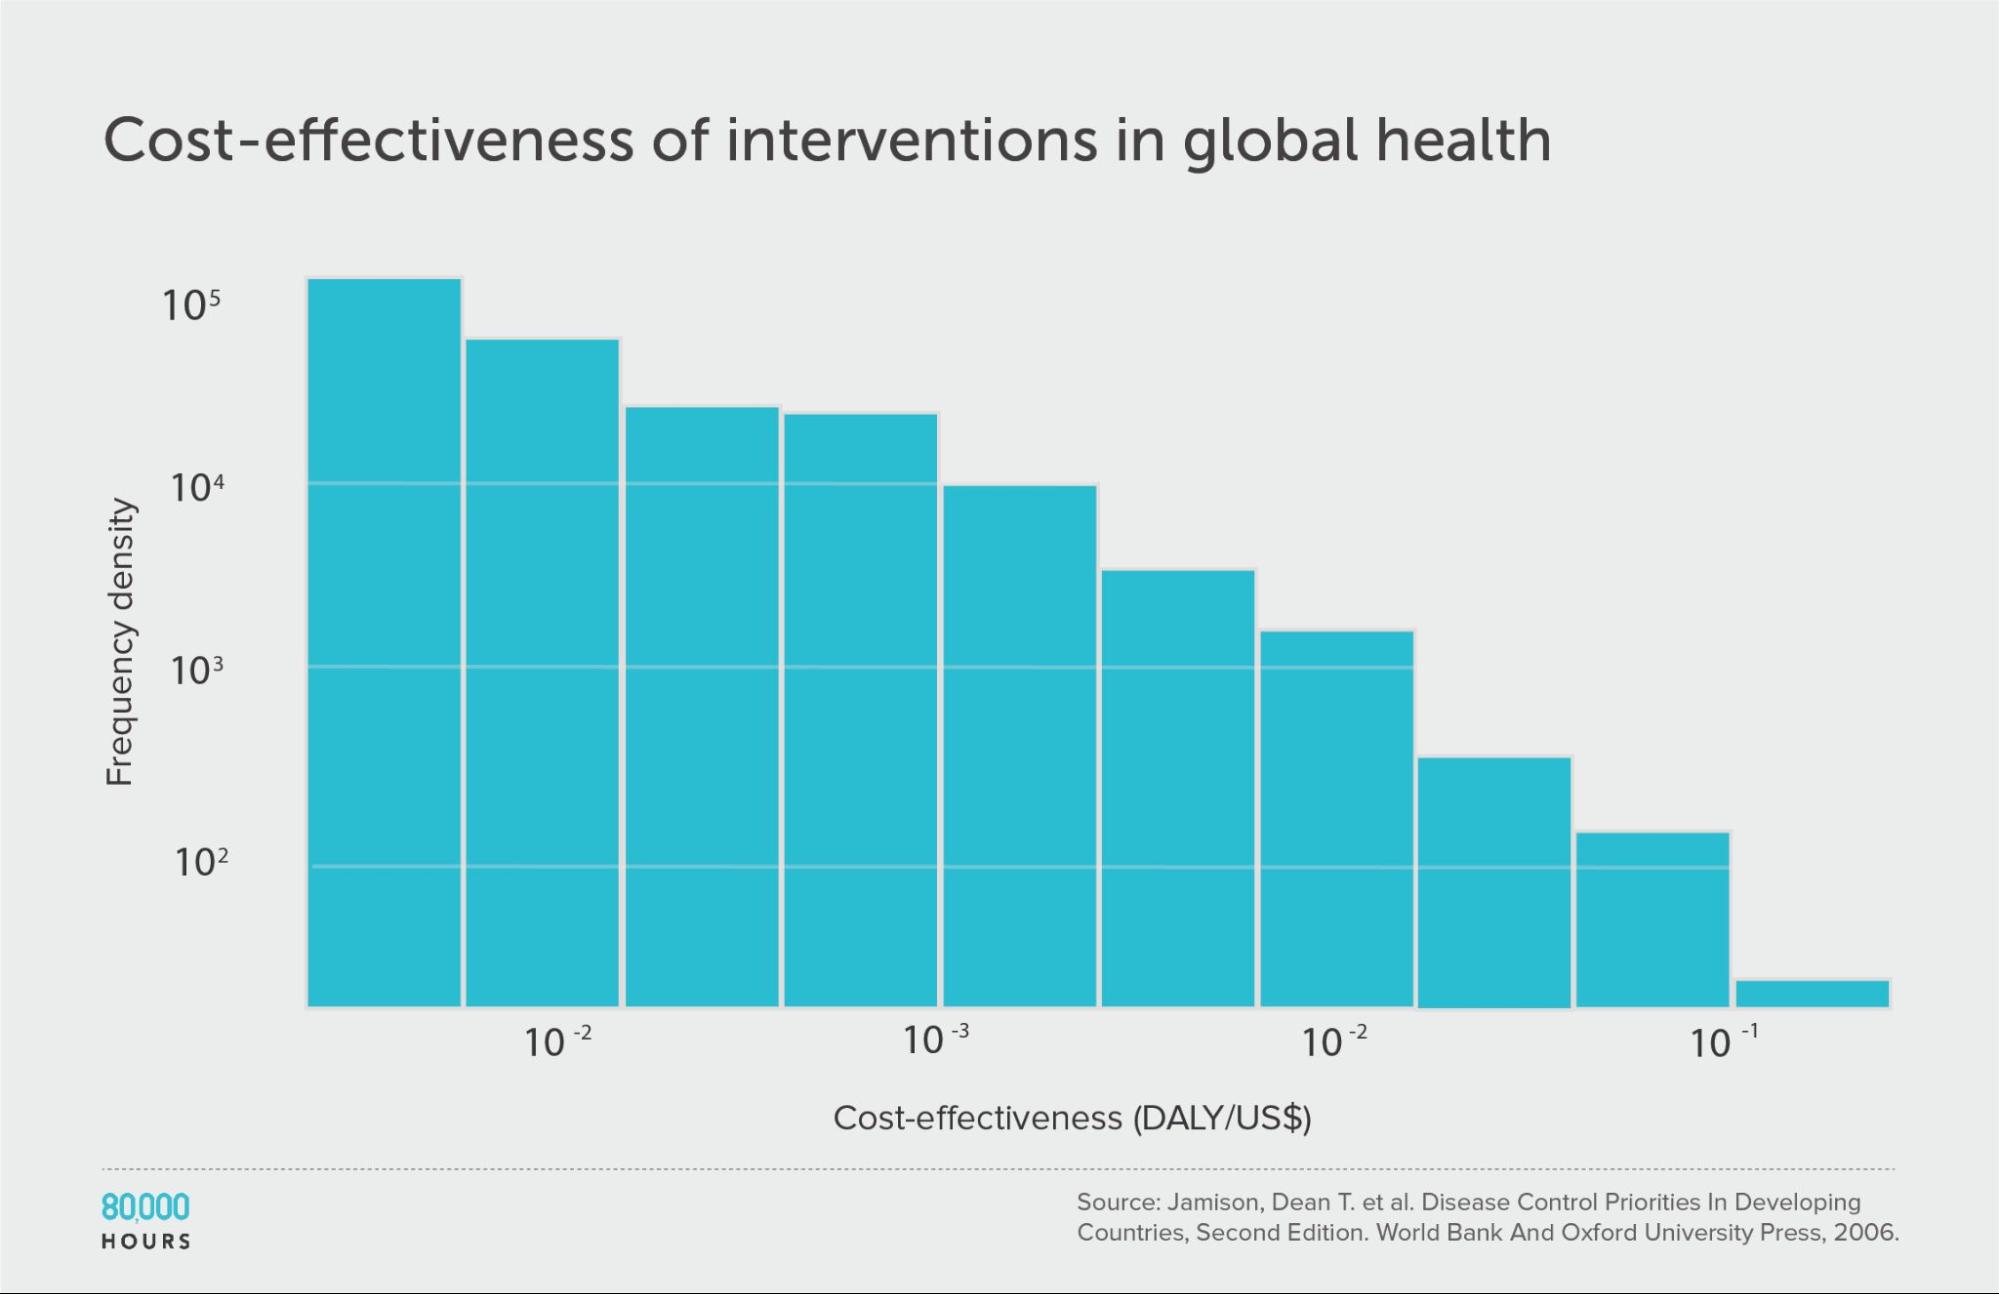 Logarithmic bin histogram of the cost effectiveness of health interventions in developing countries in terms of how many years of illness they prevent, according to data from the DCP2